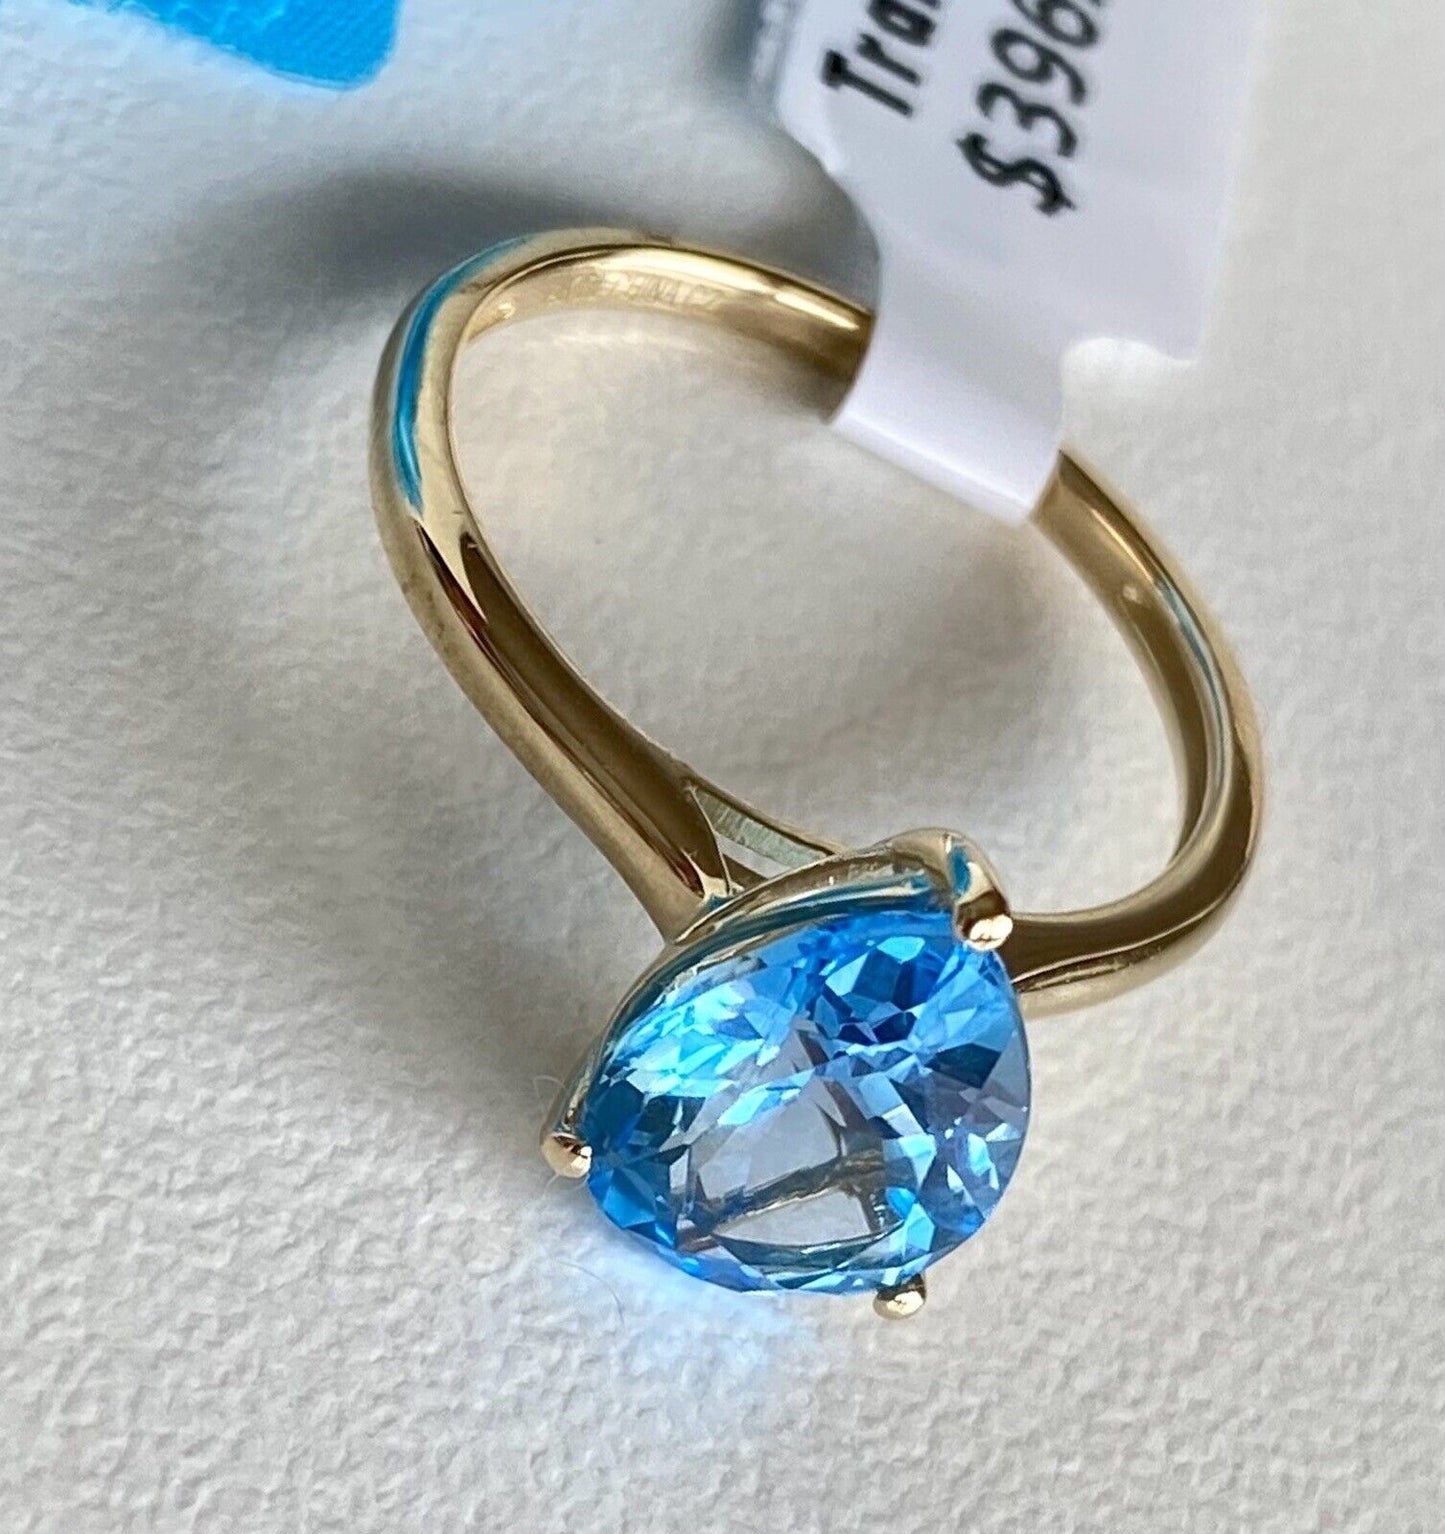 Solid 14K Yellow Gold and Genuine Swiss Blue Topaz Solitaire Ring, New